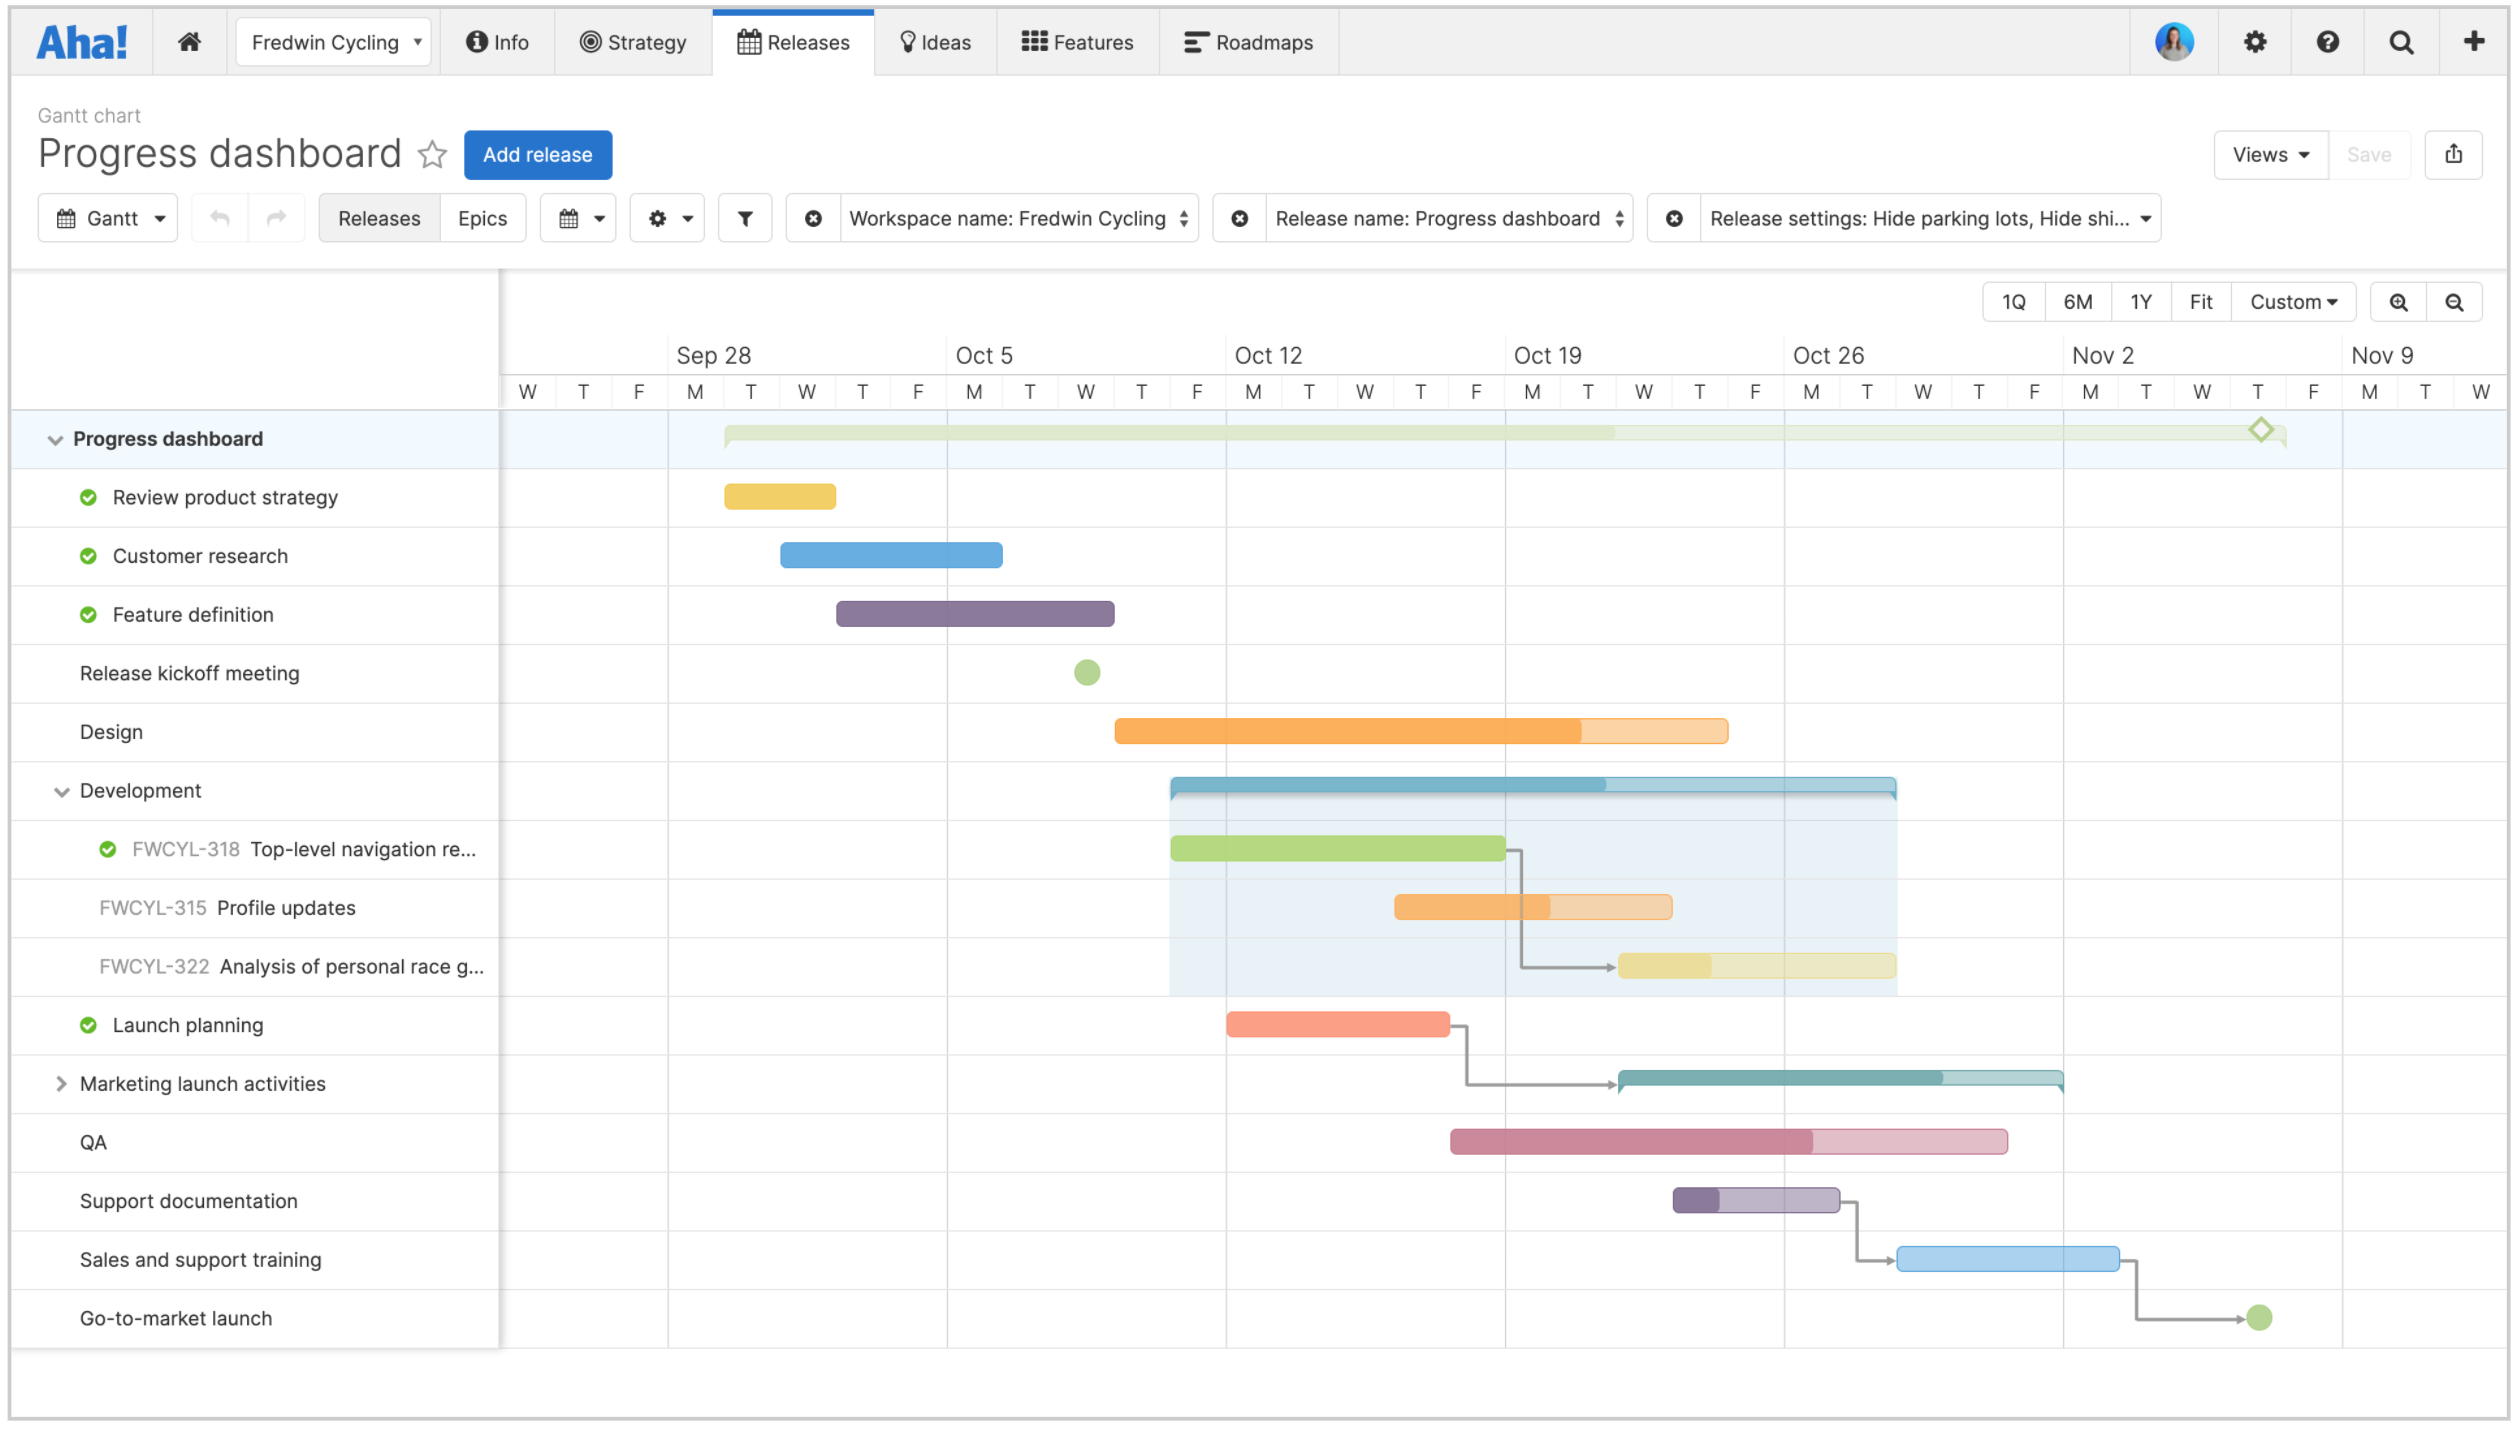 Timeline view in Aha